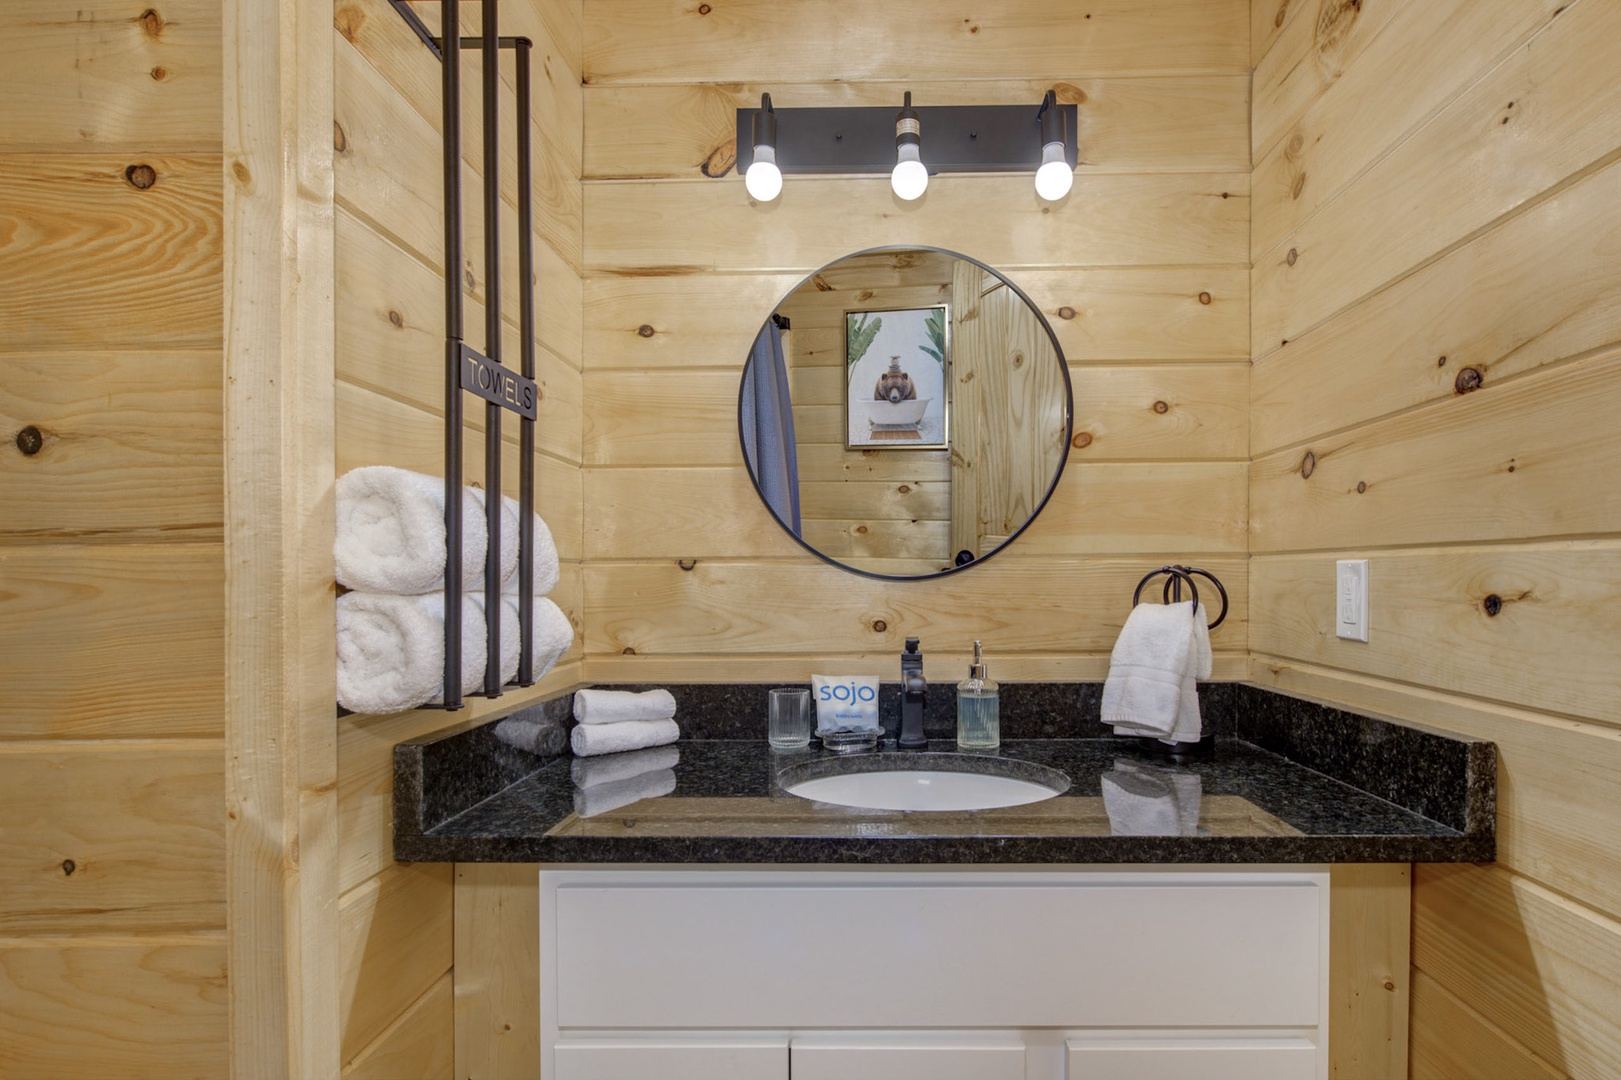 The additional full bathroom includes a single vanity & shower/tub combo